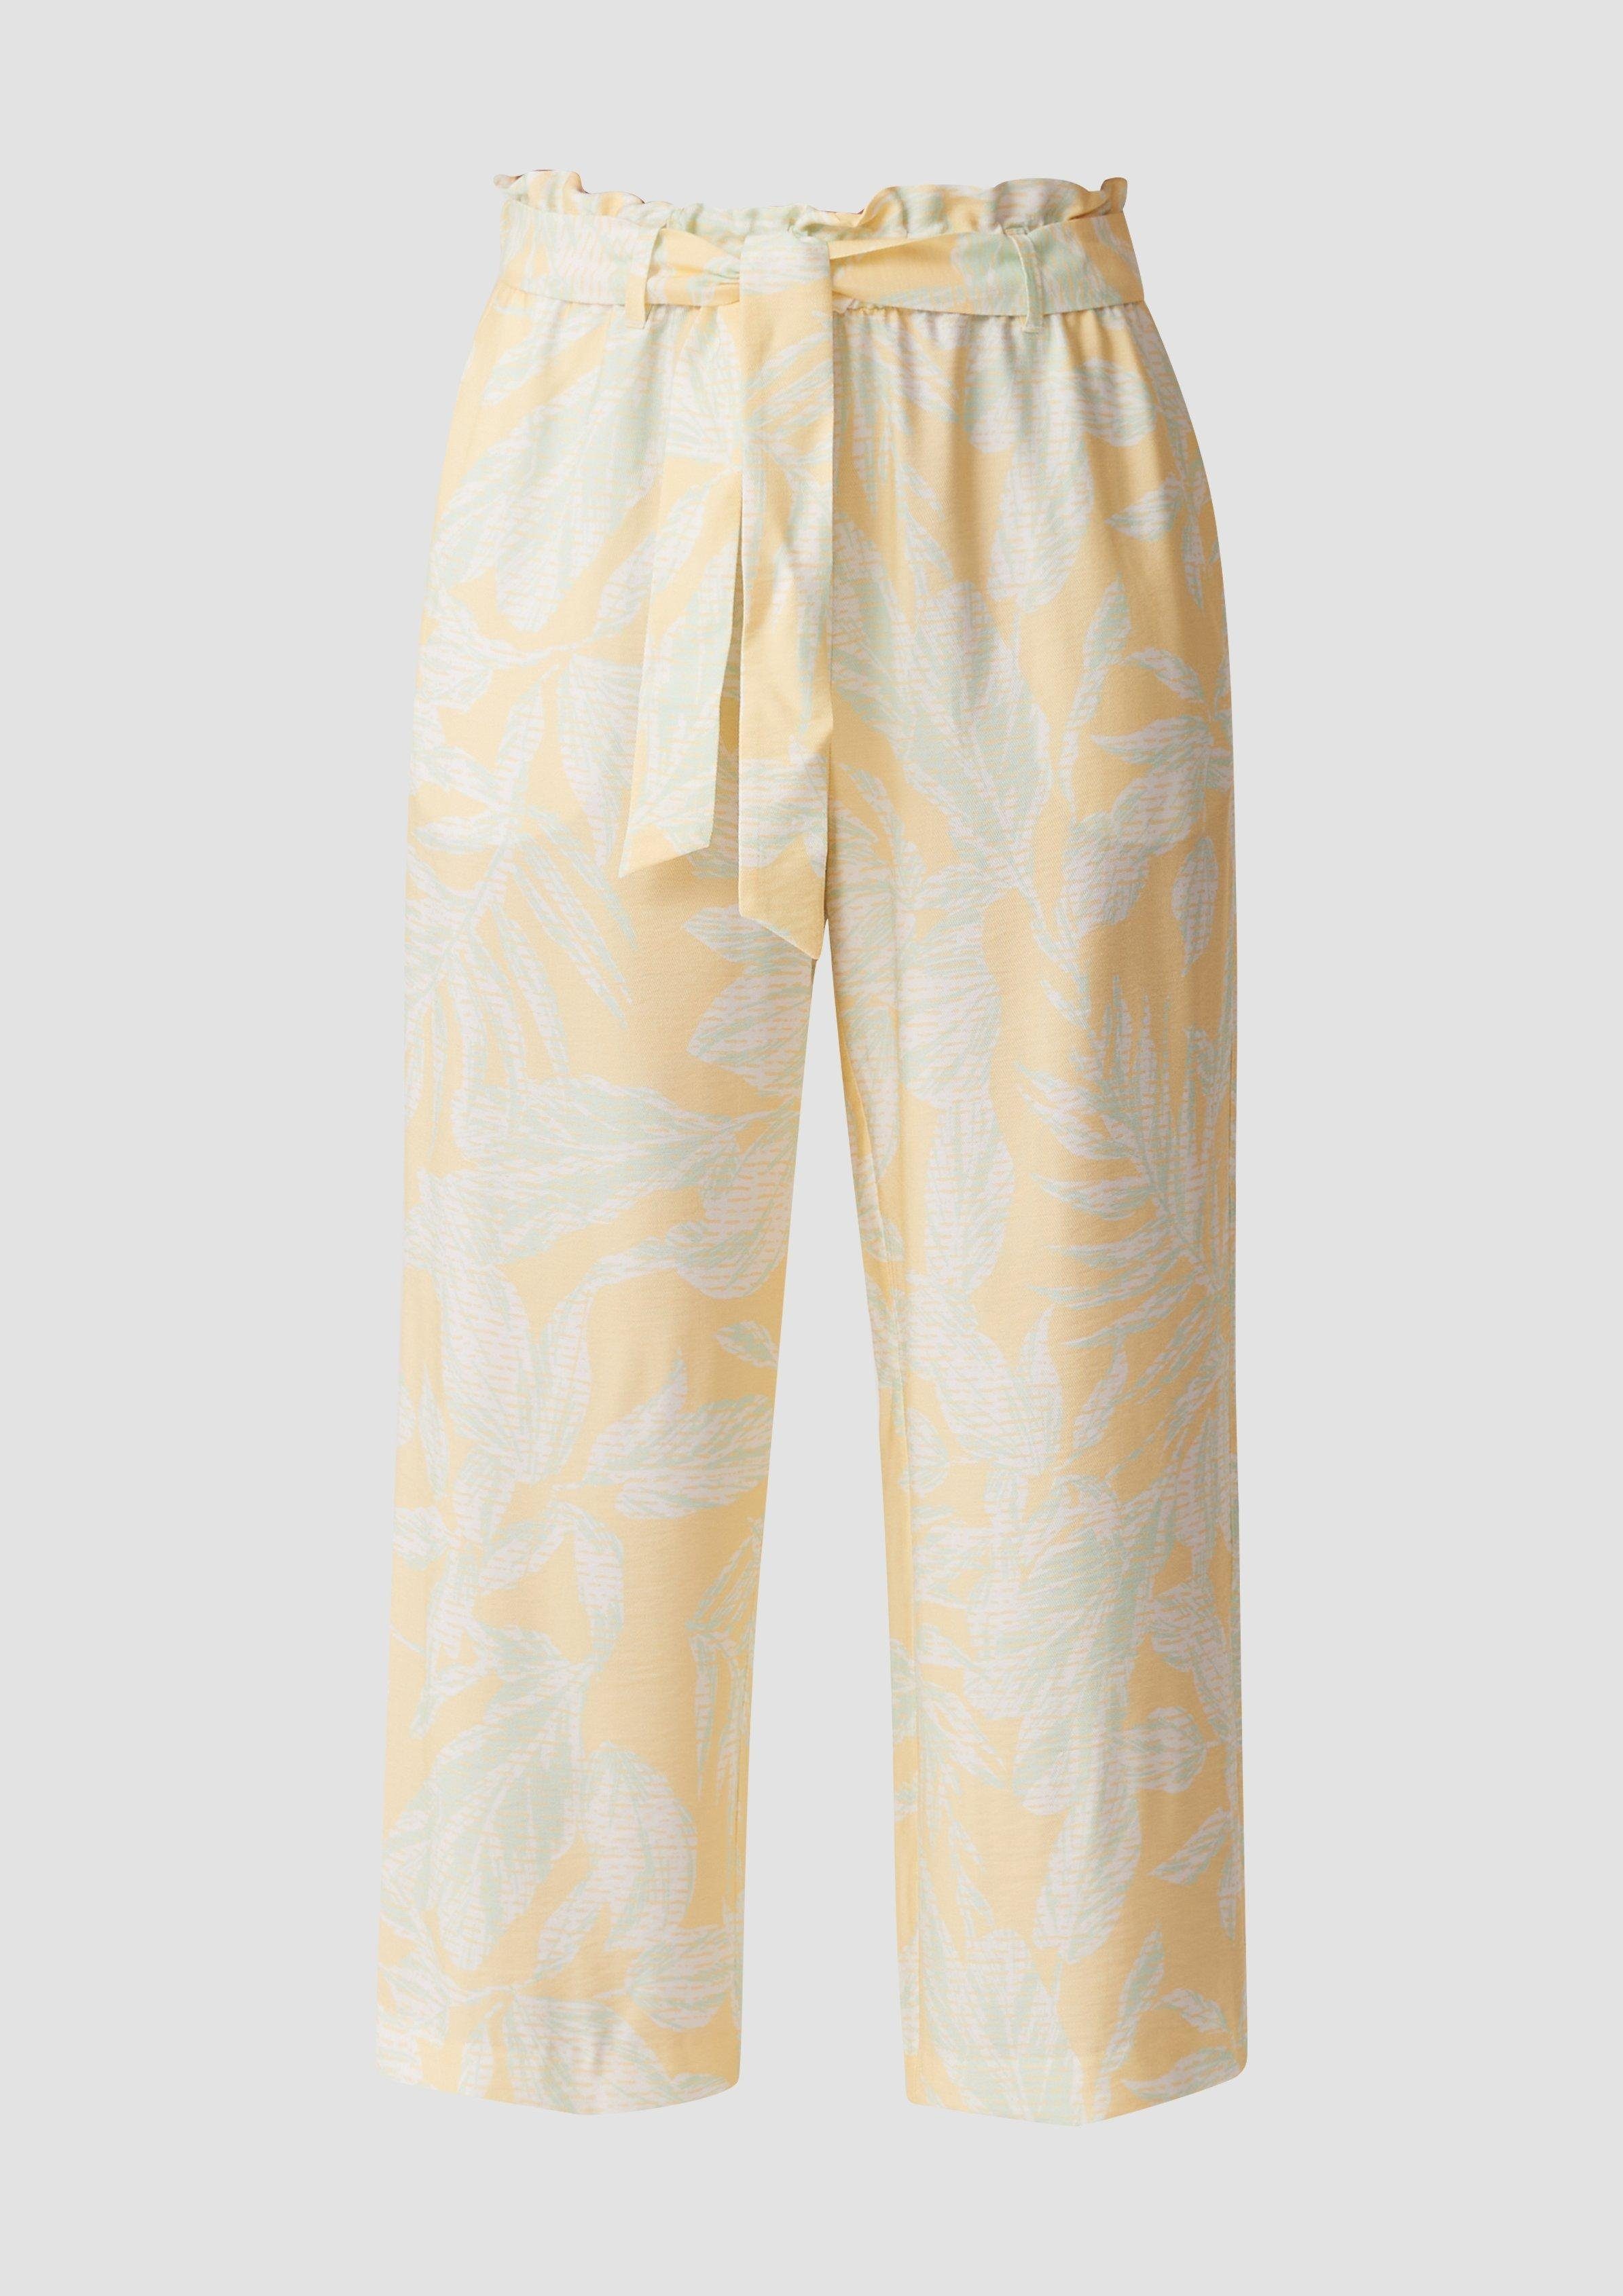 mit Loose: Comma Hose vanille Allover-Print Stoffhose